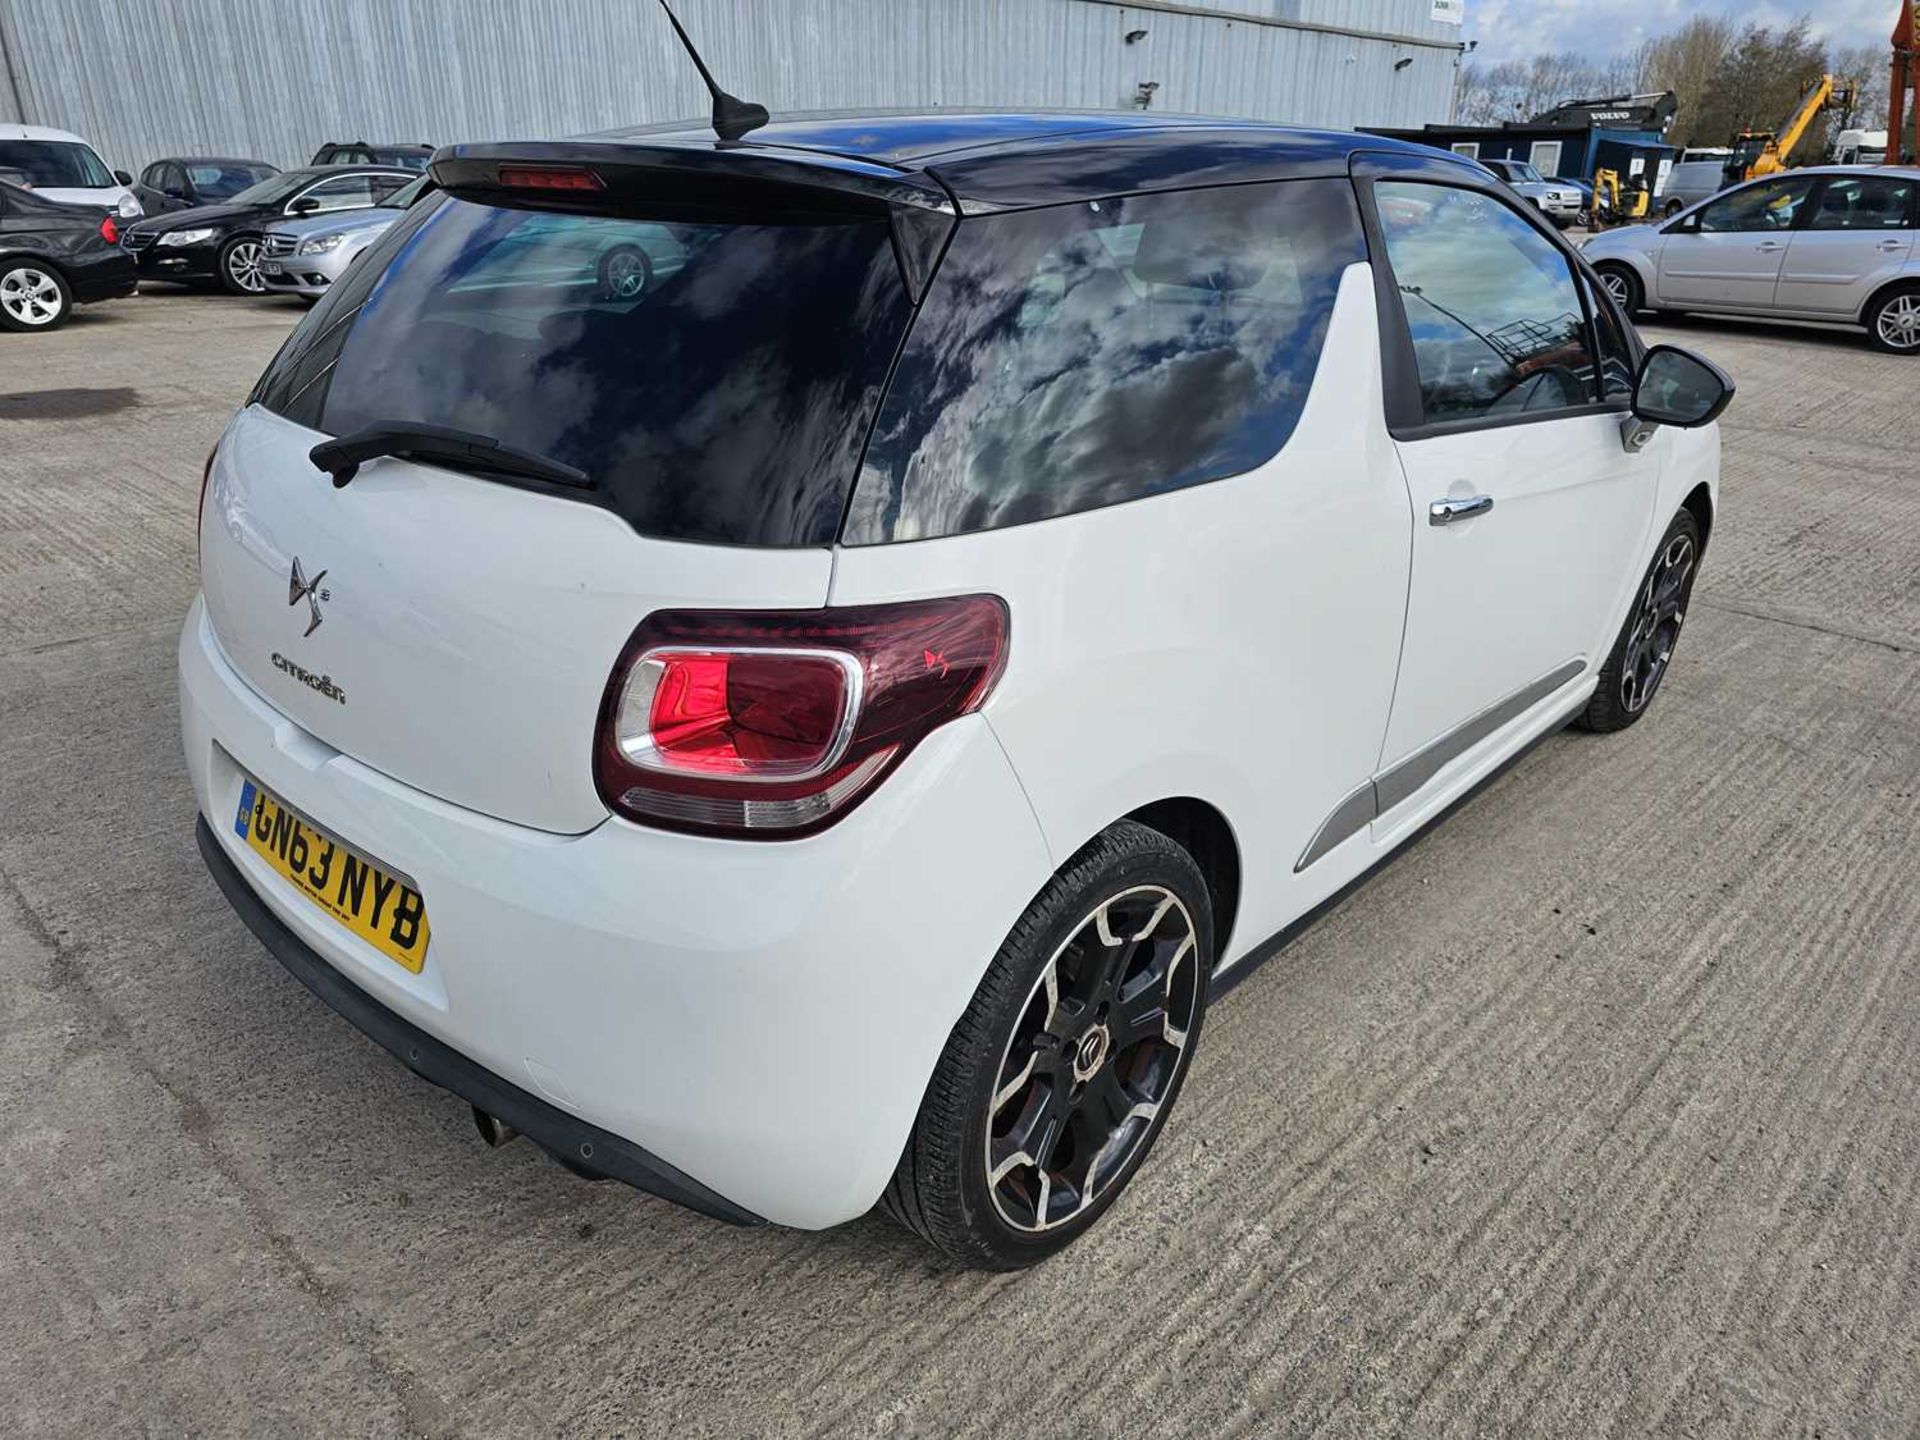 2013 Citroen DS3, 5 Speed, A/C (Reg. Docs. Available) - Image 6 of 29